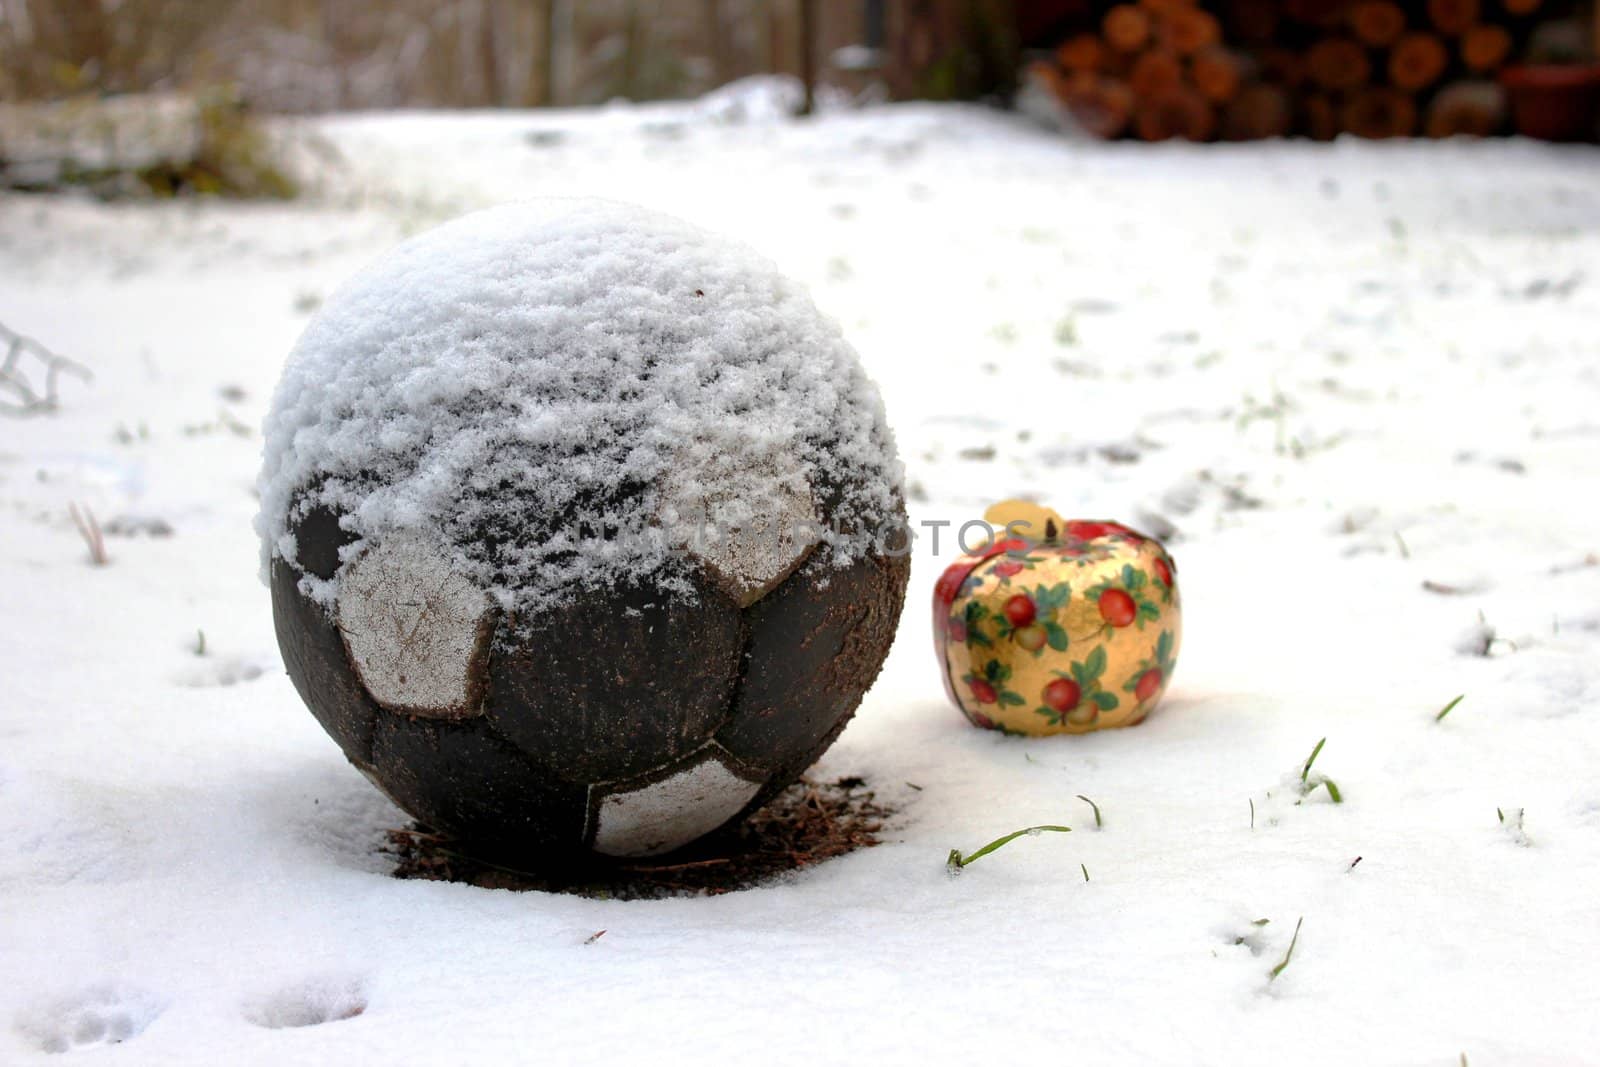 Christmas apple and a soccer ball in the snow by Metanna